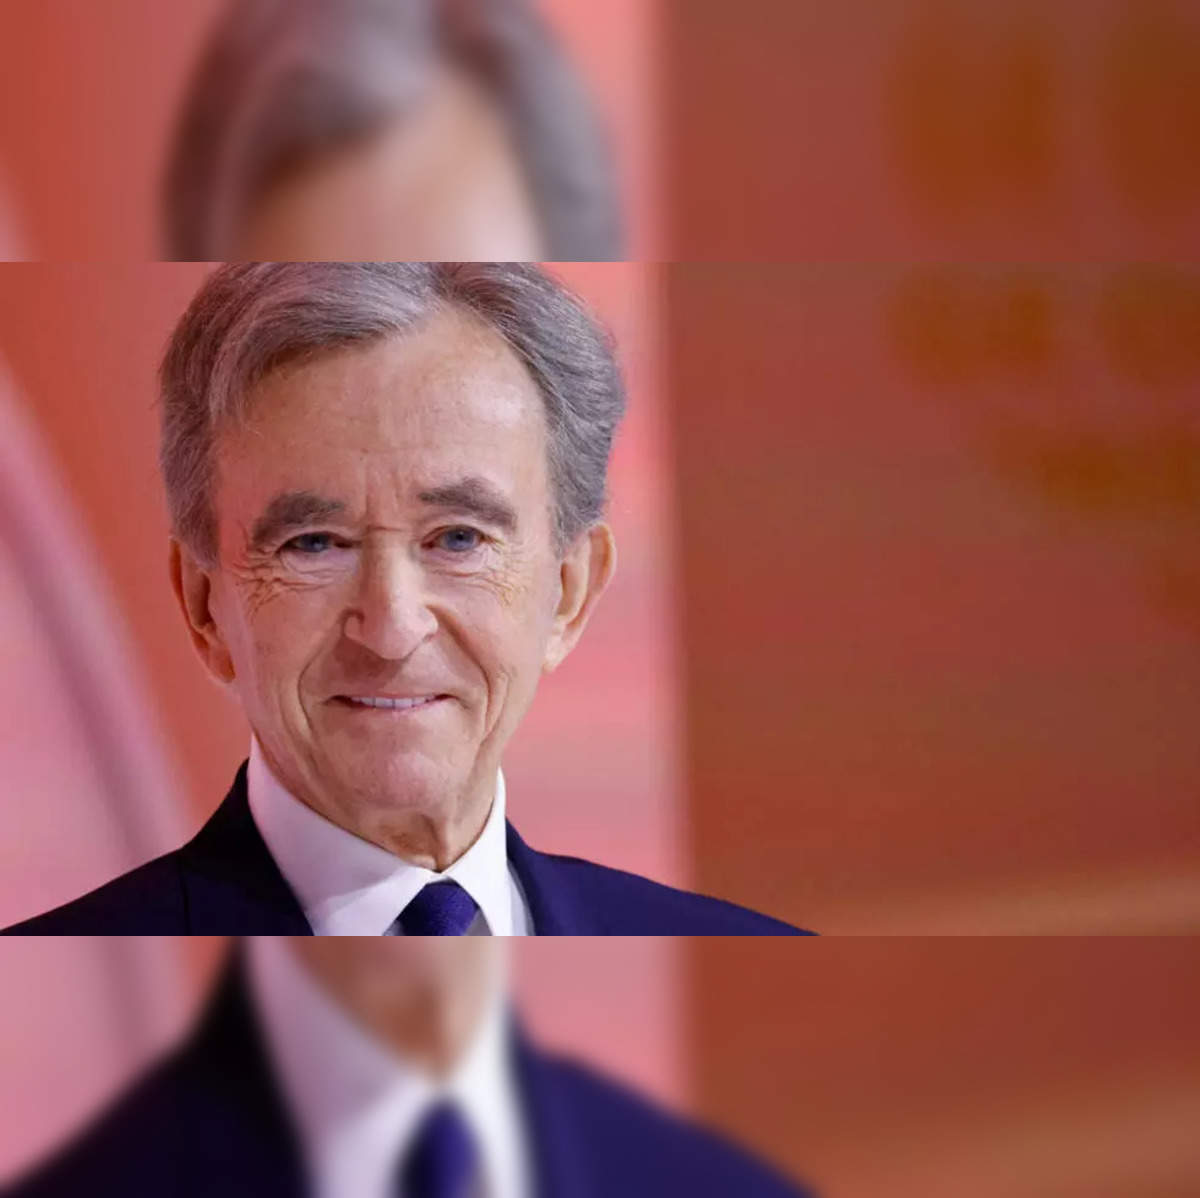 THE BIOGRAPHY OF BERNARD ARNAULT: A French Billionaire and Fashion